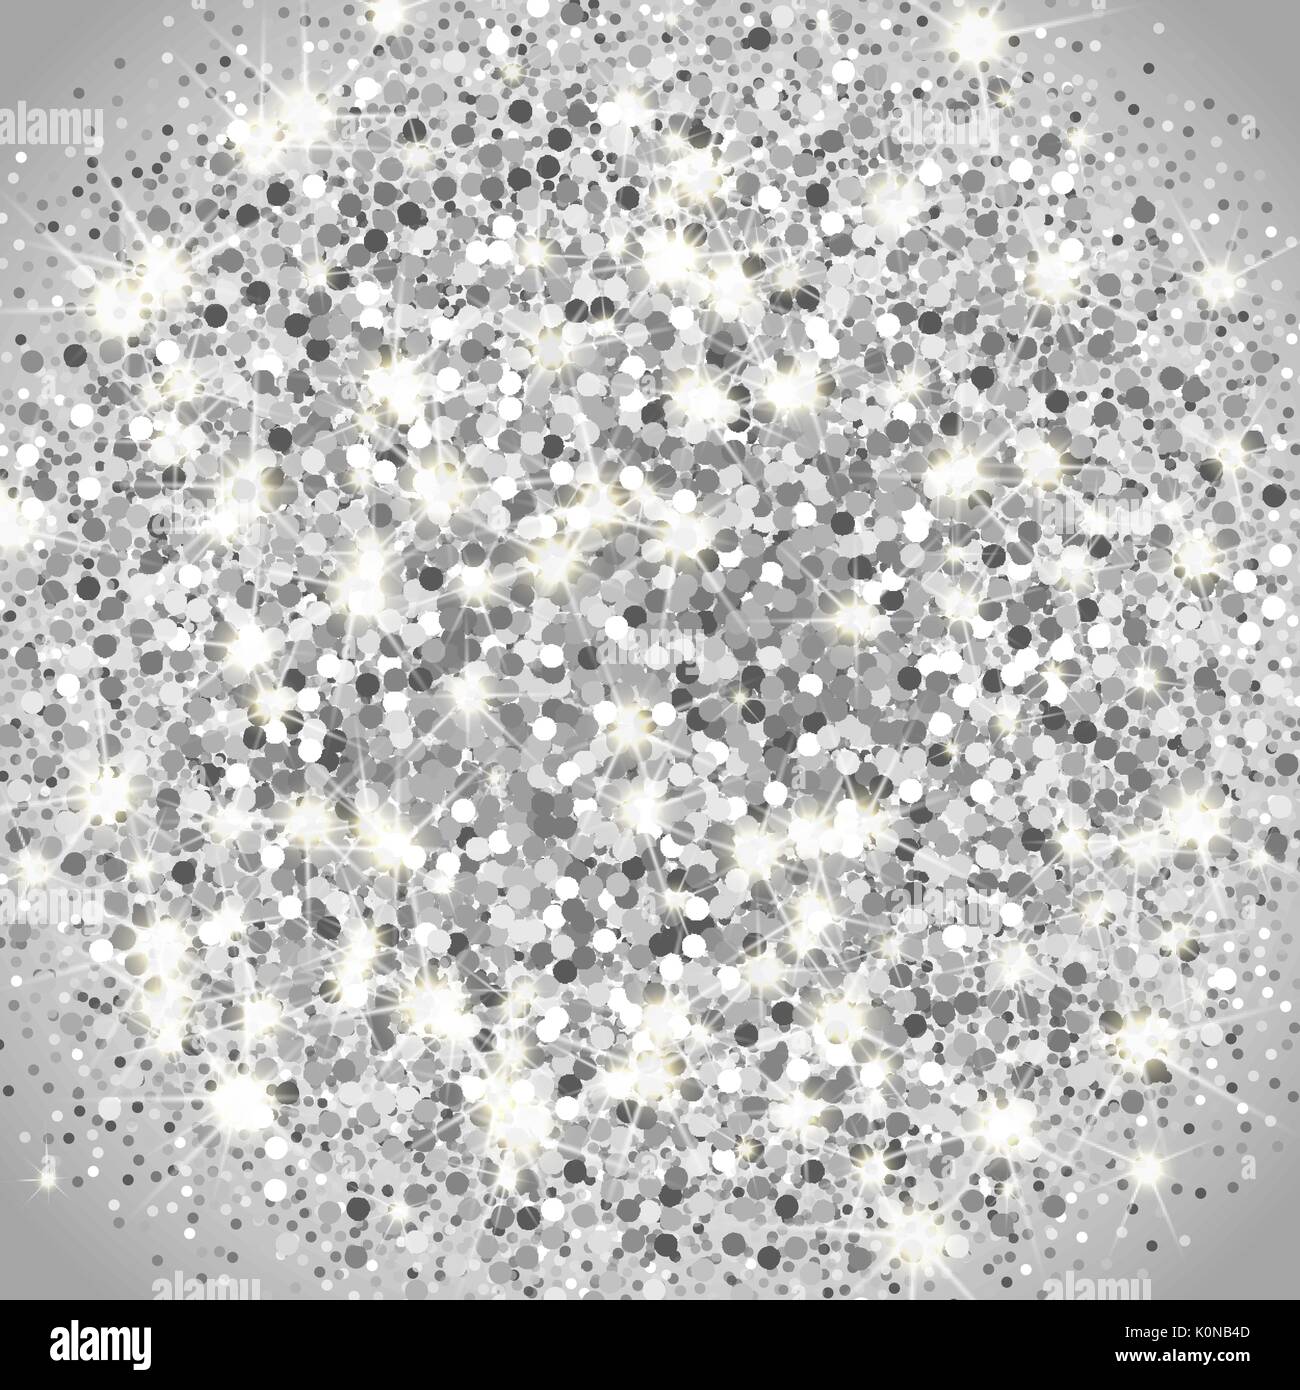 Falling silver particles on a black background. Scattered silver confetti. Rich luxury fashion backdrop. Bright shining glitter. Round dots. Stock Vector